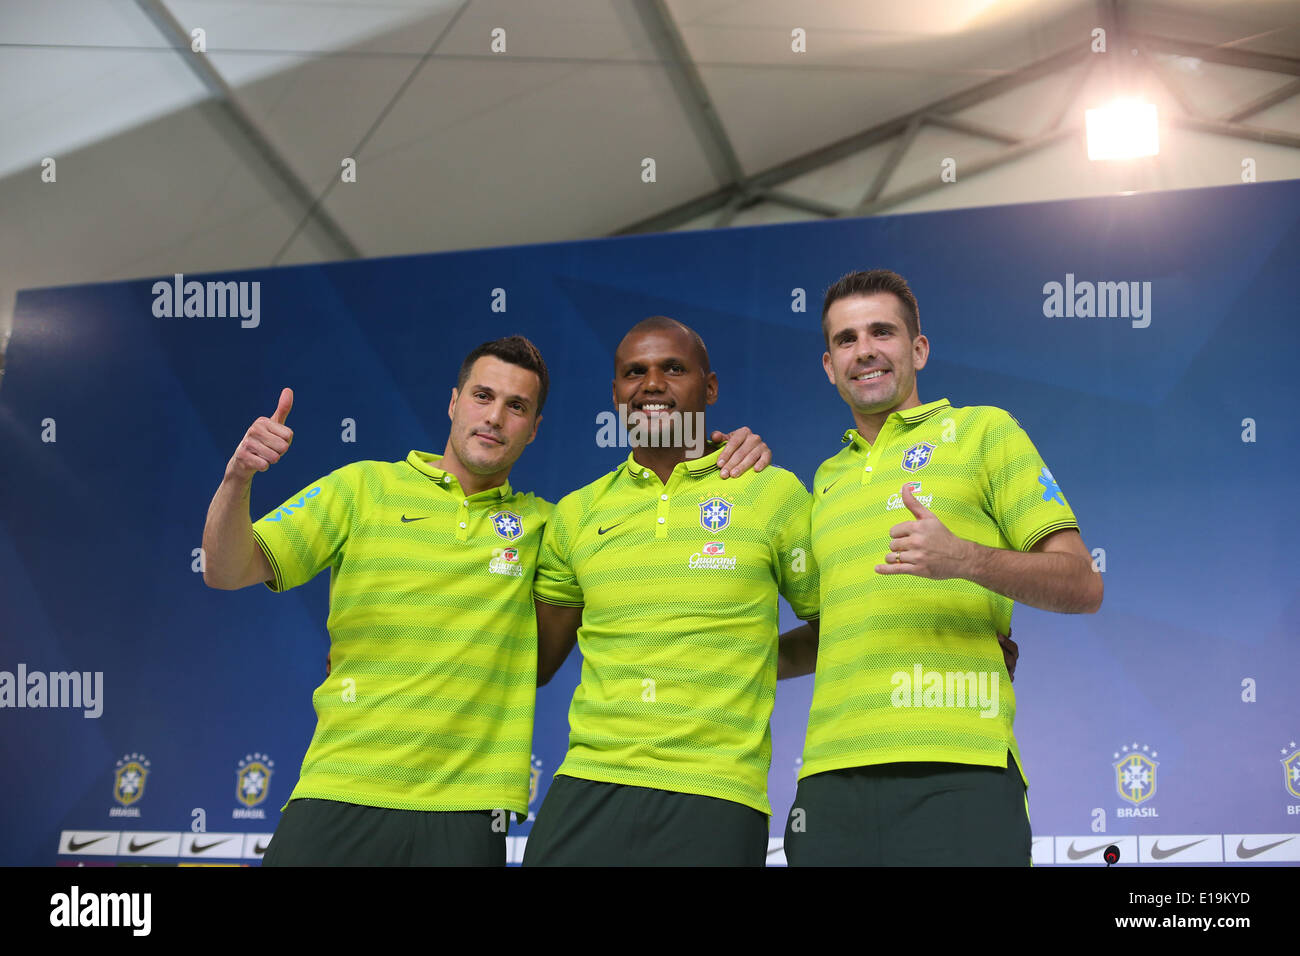 Rio De Janeiro, Brazil. 27th May, 2014. Goalie Julio Cesar (L) and players Jefferson (C) and Victor (R) of the Brazilian national soccer team pose during a press conference after taking part in a training session for the FIFA World Cup Brazil 2014 in Teresopolis, in Rio de Janeiro, Brazil, May 27, 2014. © AGENCIA ESTADO/Xinhua/Alamy Live News Stock Photo